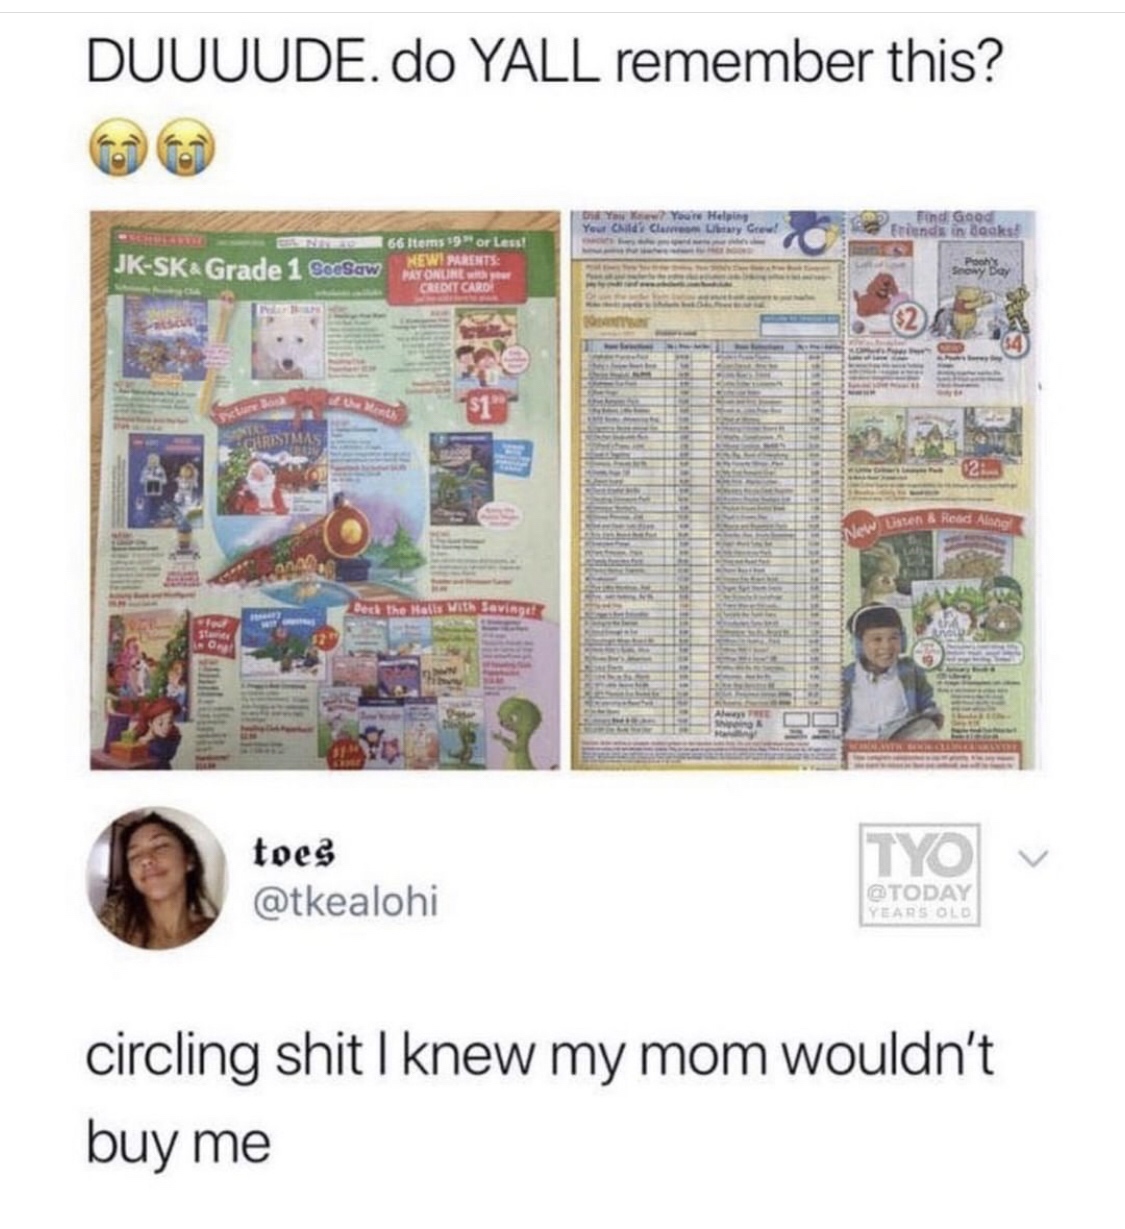 jk sk & grade 1 - Duuuude. do Yall remember this? Yoww You You Can Helping Find Good inds in docks 166 Items 19" or Less! Parents JkSk&Grade 1 Sorsaw Vi Vil Savinget toes Tyo Years Old circling shit I knew my mom wouldn't buy me